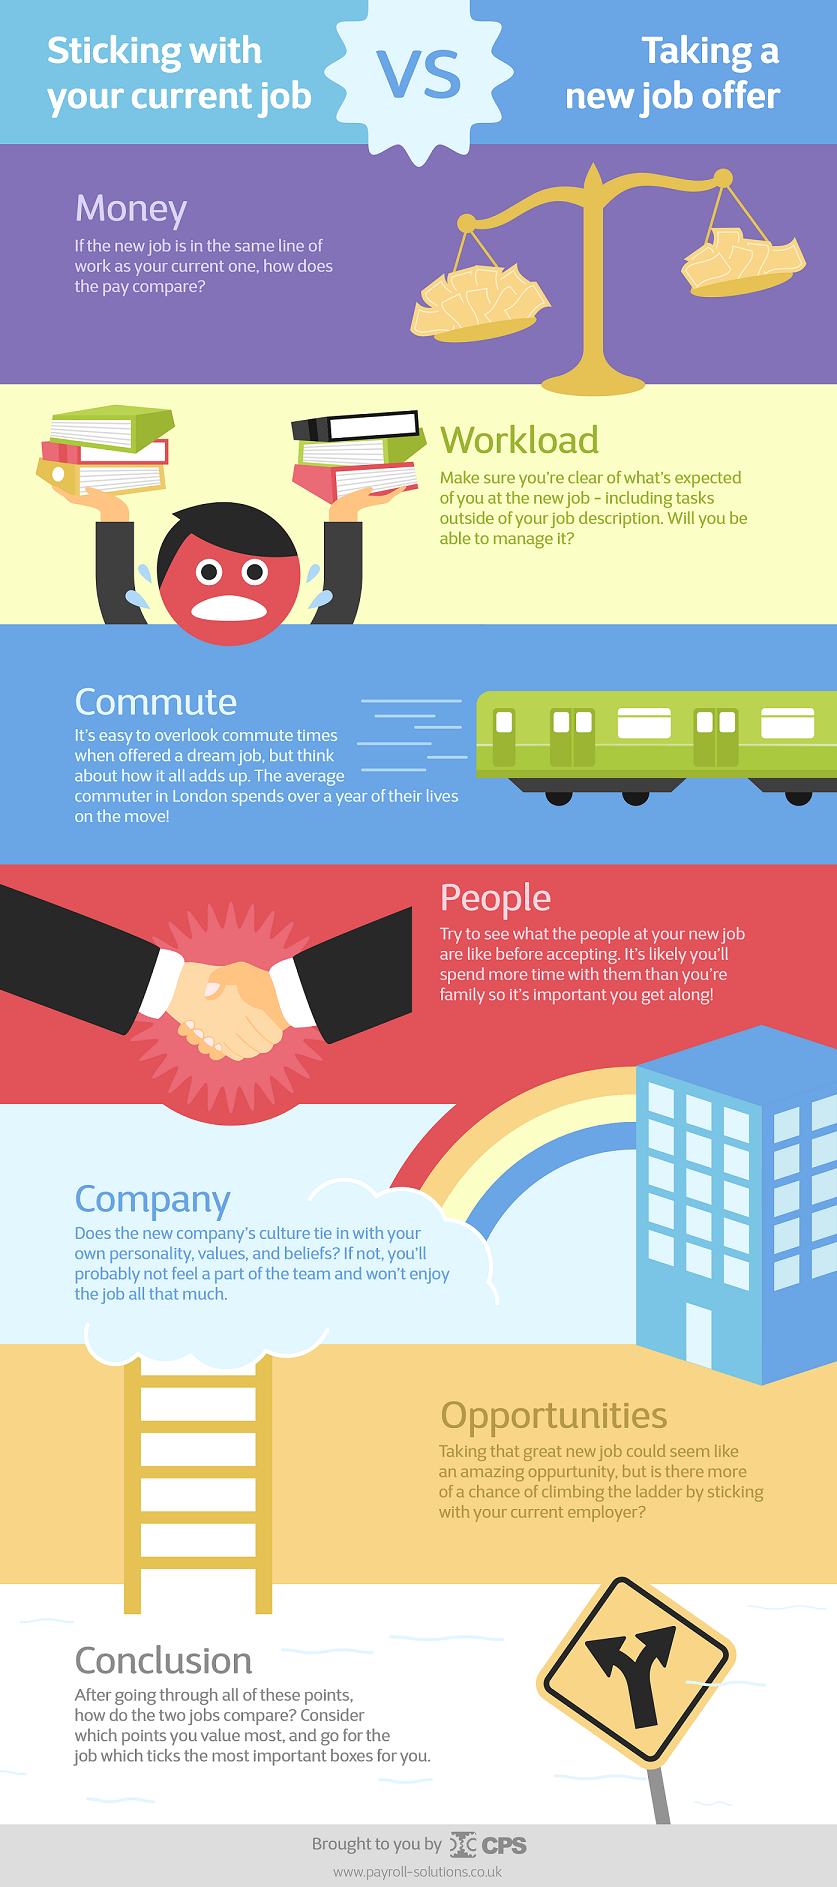 Top Things to Consider Before Accepting a Job Offer [INFOGRAPHIC]